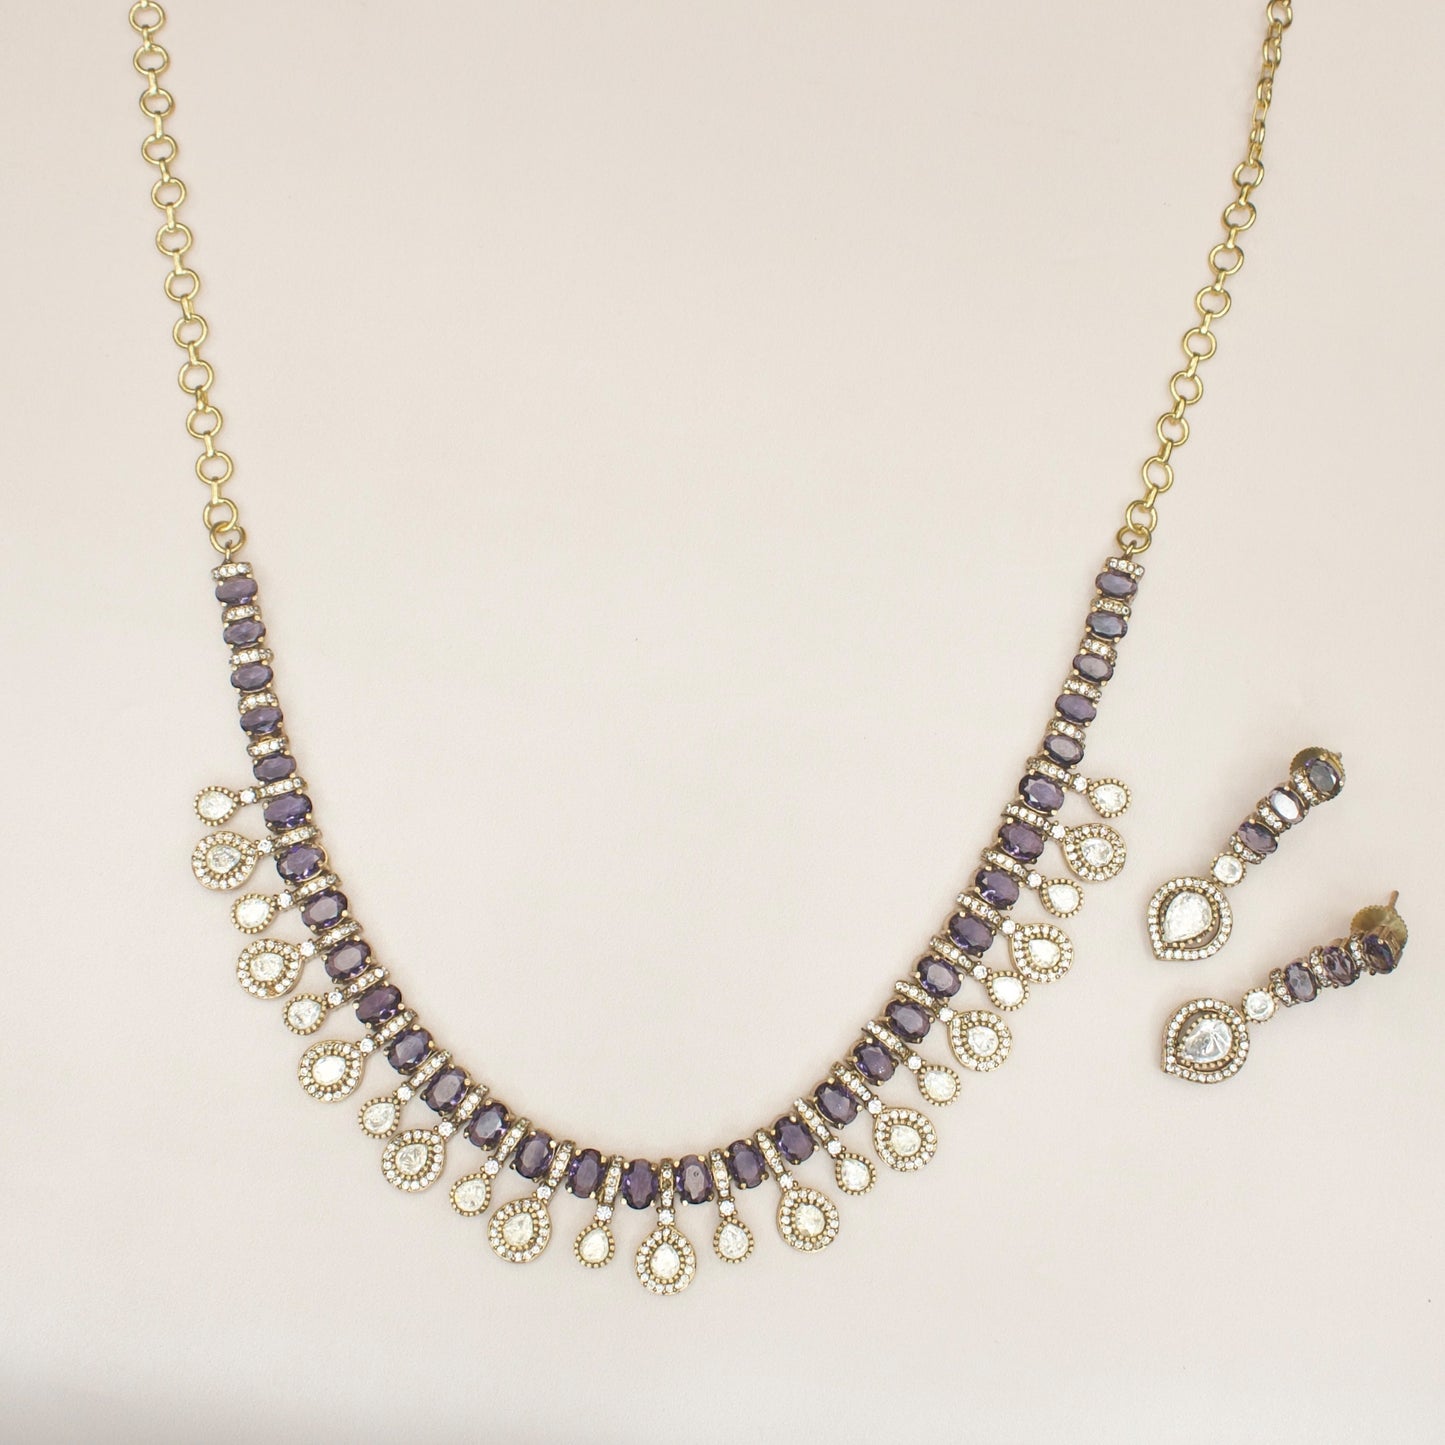 Trending One-Line Victorian Necklace Set with drop earrings